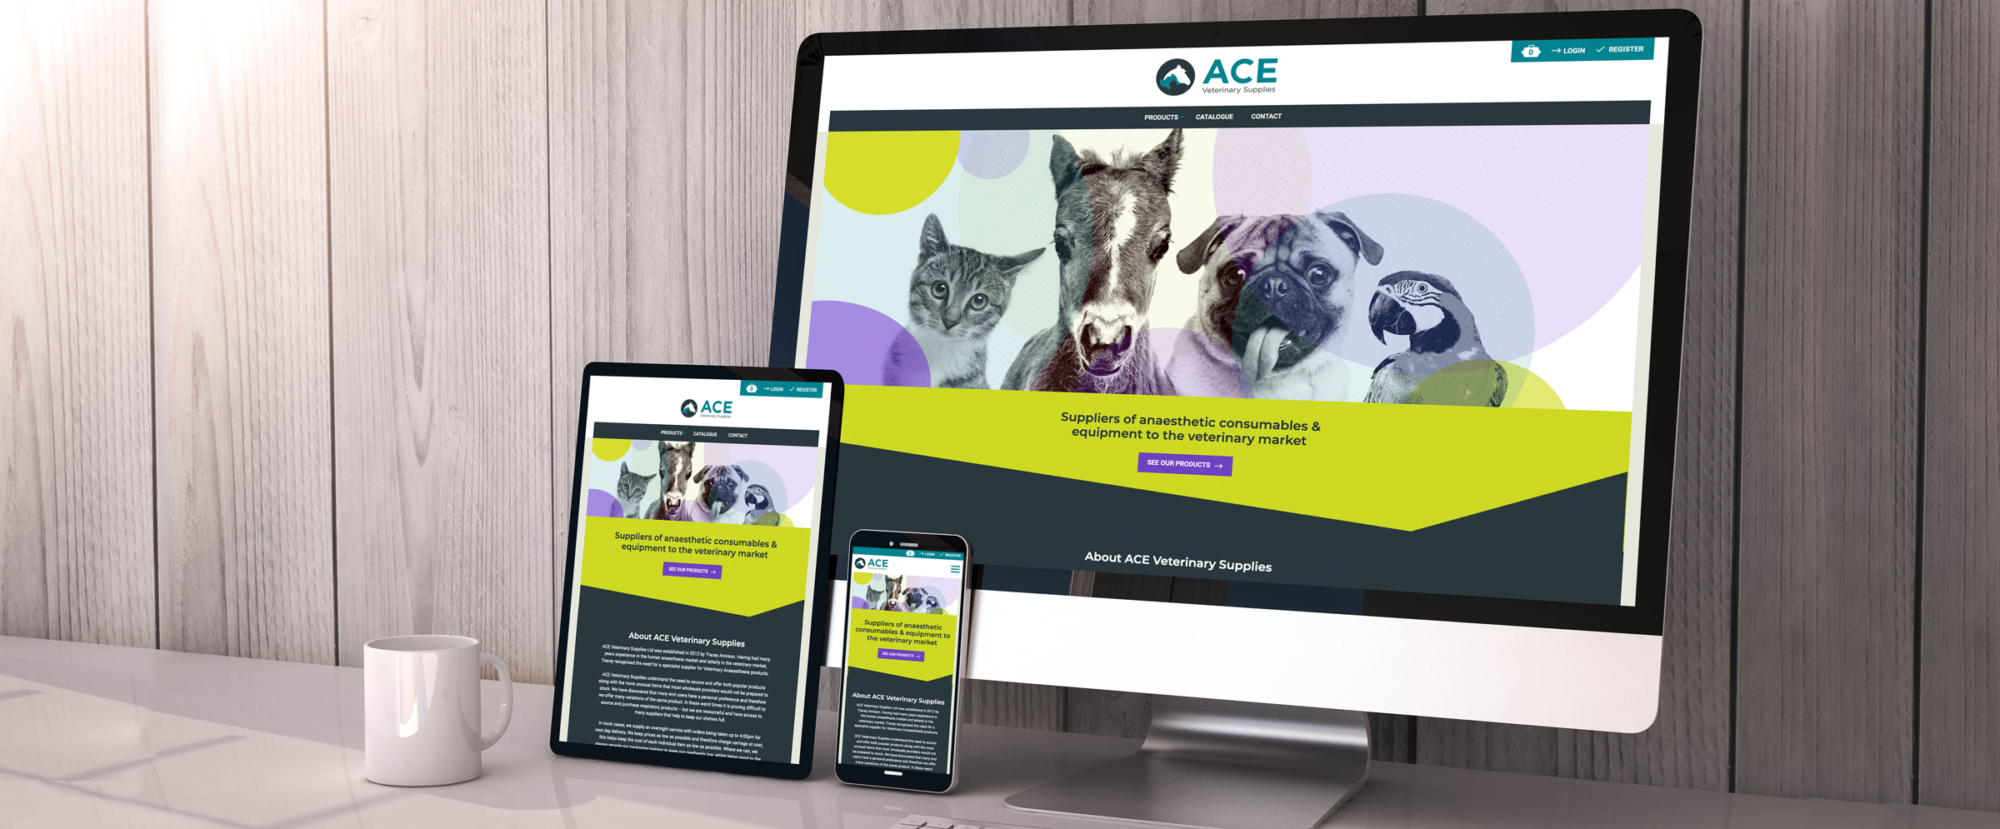 ace veterinary website home page on computer, ipad and iphone on a desk